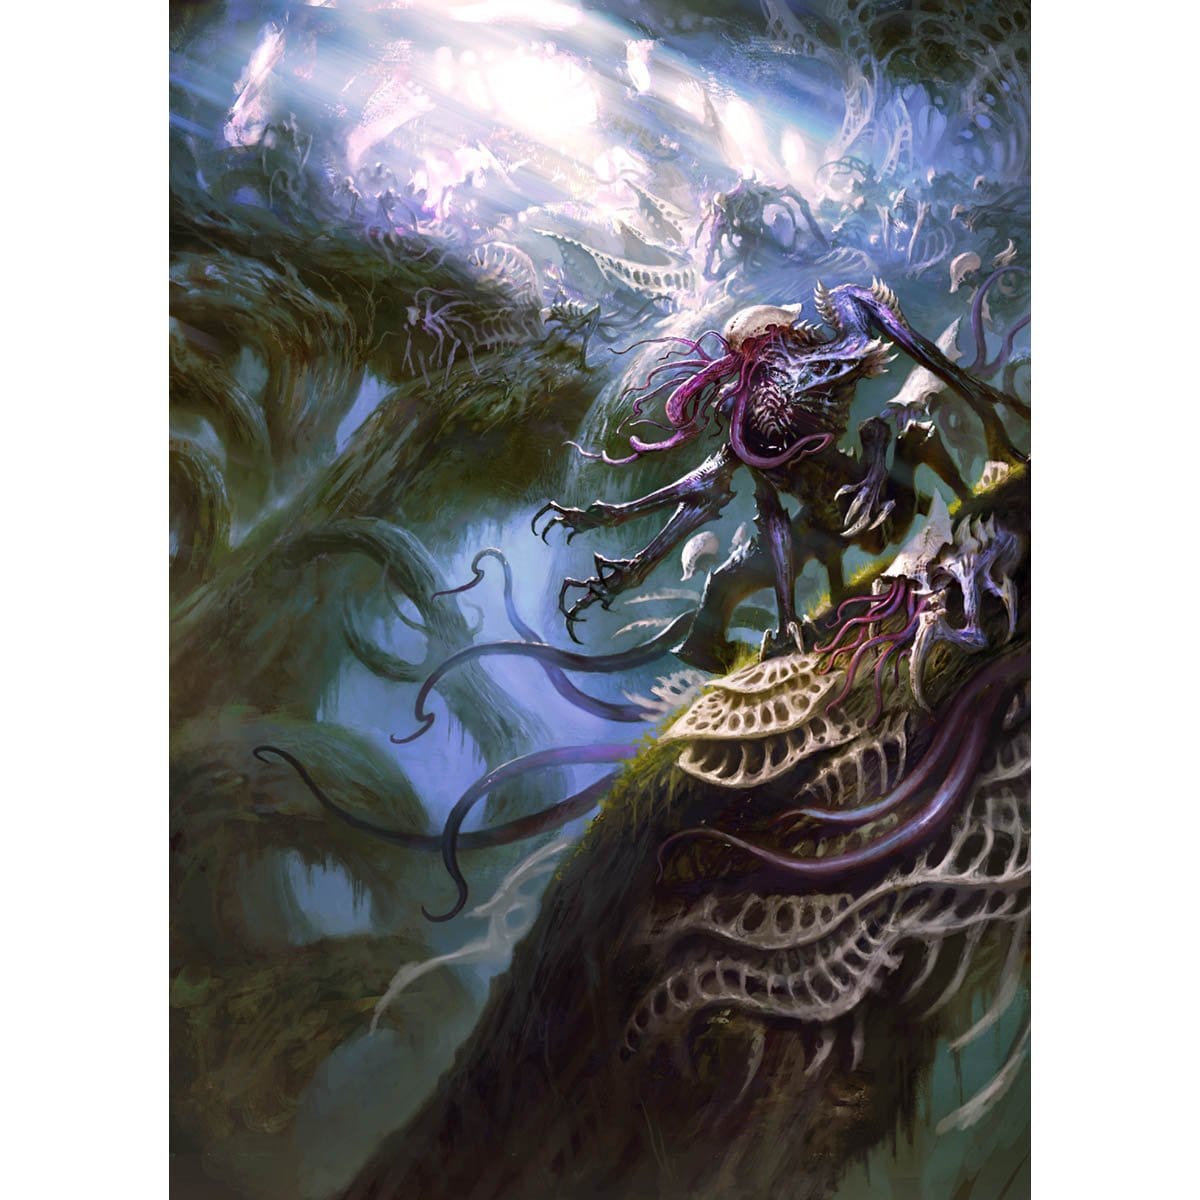 From Beyond Print - Print - Original Magic Art - Accessories for Magic the Gathering and other card games